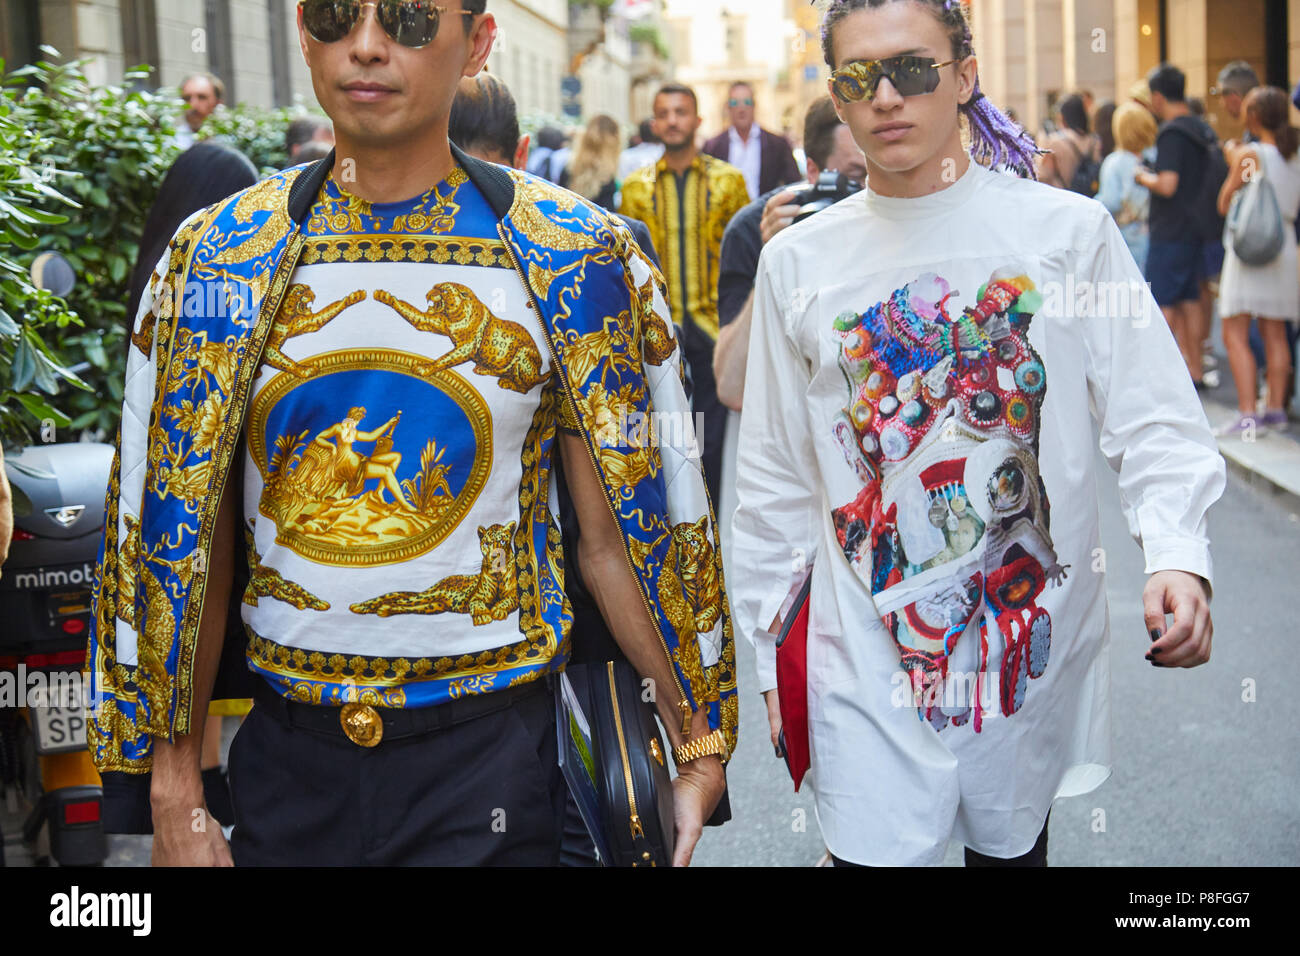 barst Schema Blauw MILAN - JUNE 16: Men with Versace shirt and jacket with golden decorations  and man with purple braids before Versace fashion show, Milan Fashion Week  Stock Photo - Alamy